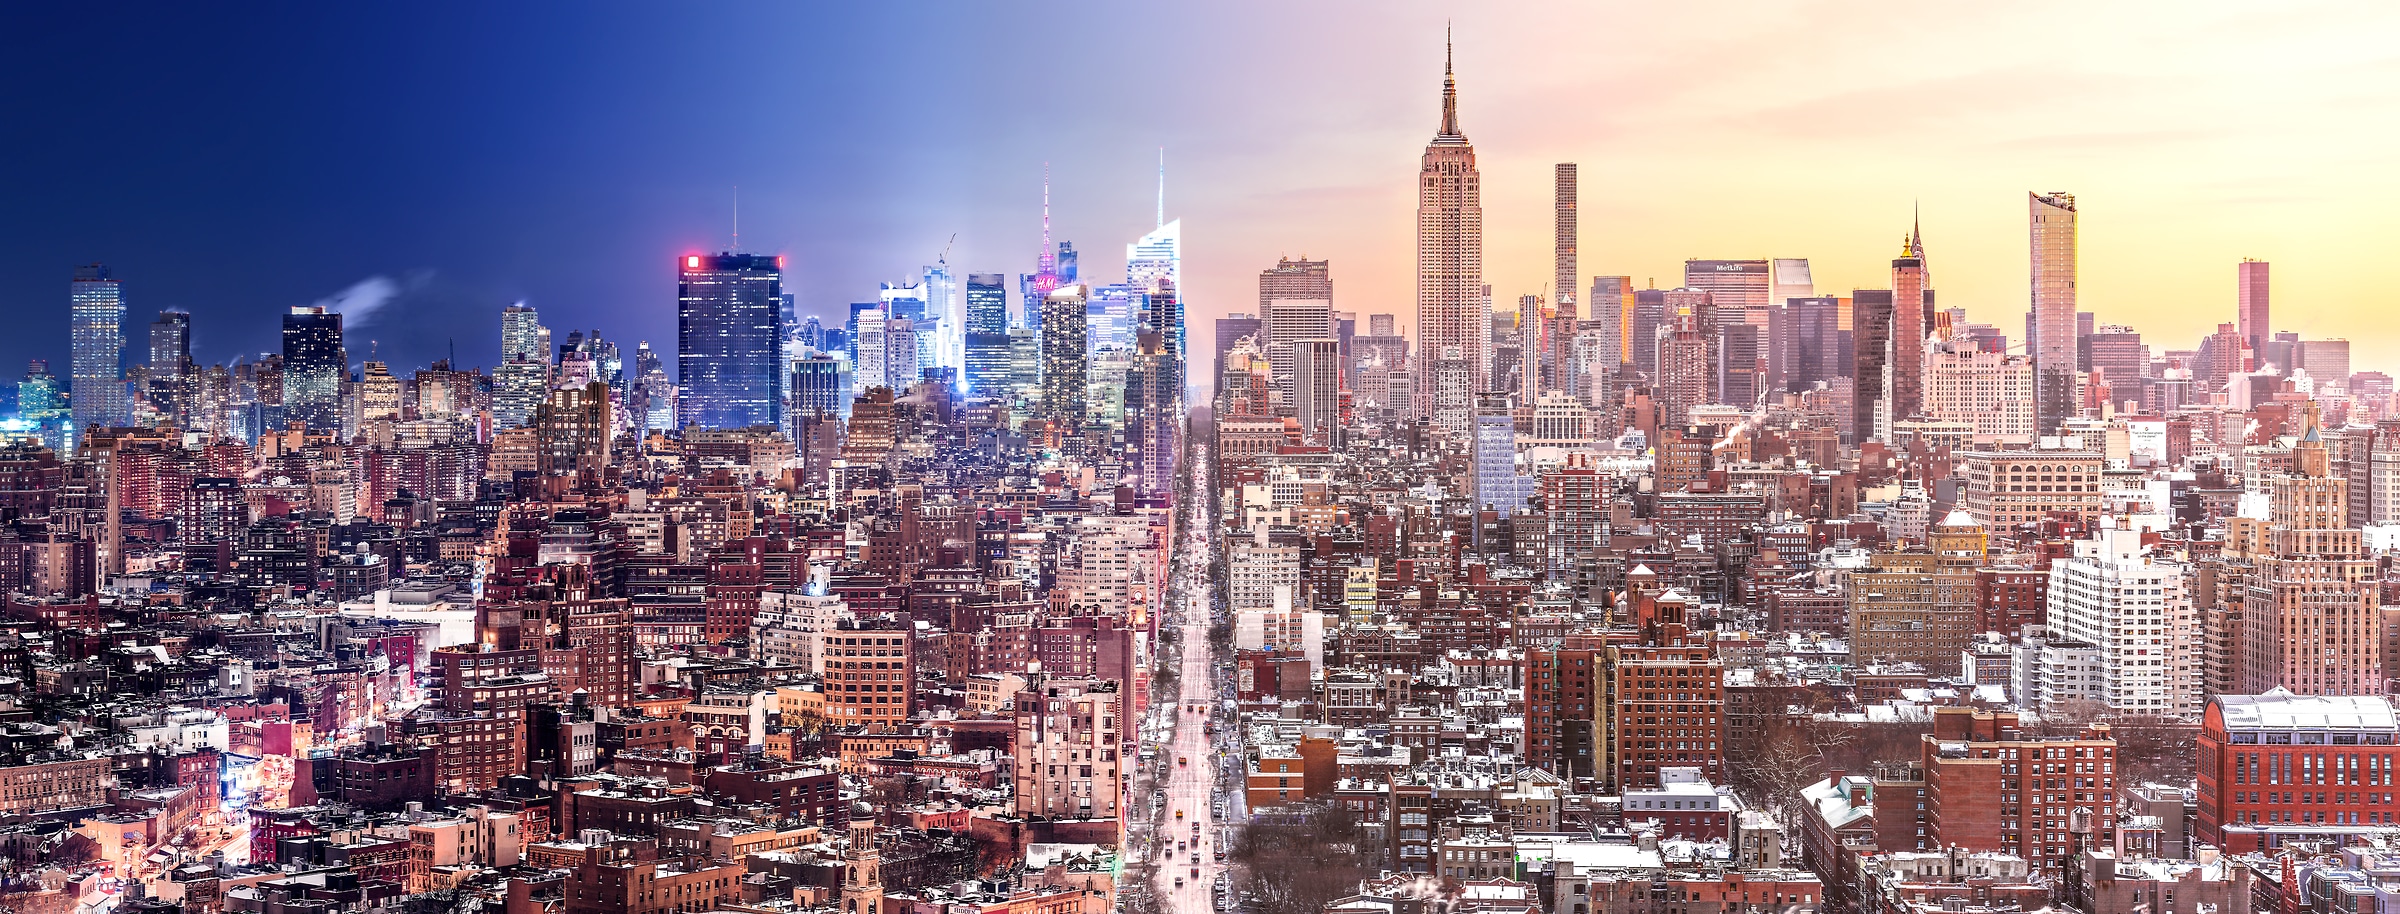 620 megapixels! A very high resolution photo of the New York City skyline transitioning from night into day; fine art cityscape photograph created by Dan Piech in Manhattan, NYC.